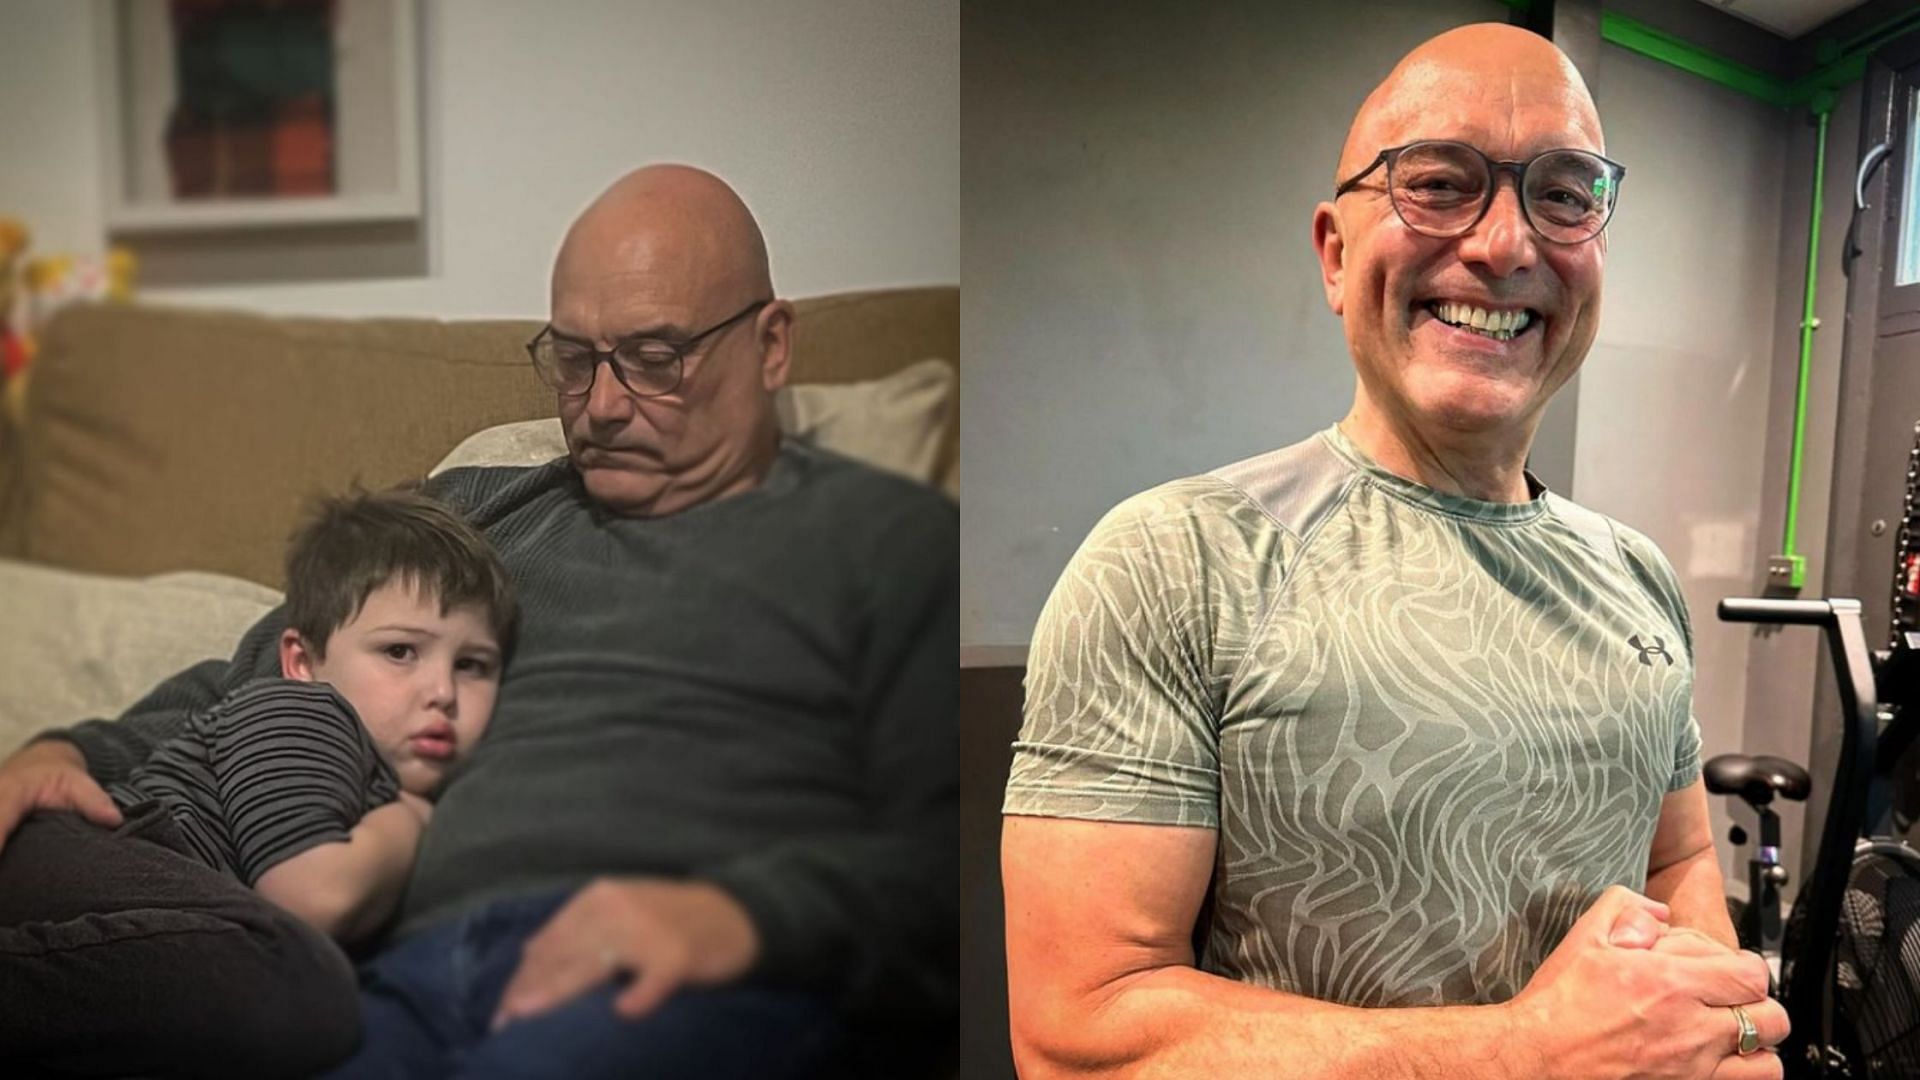 Gregg Wallace dad-shamed by netizens after revealing his Saturday routine (Image via Instagram/@greggawallace)